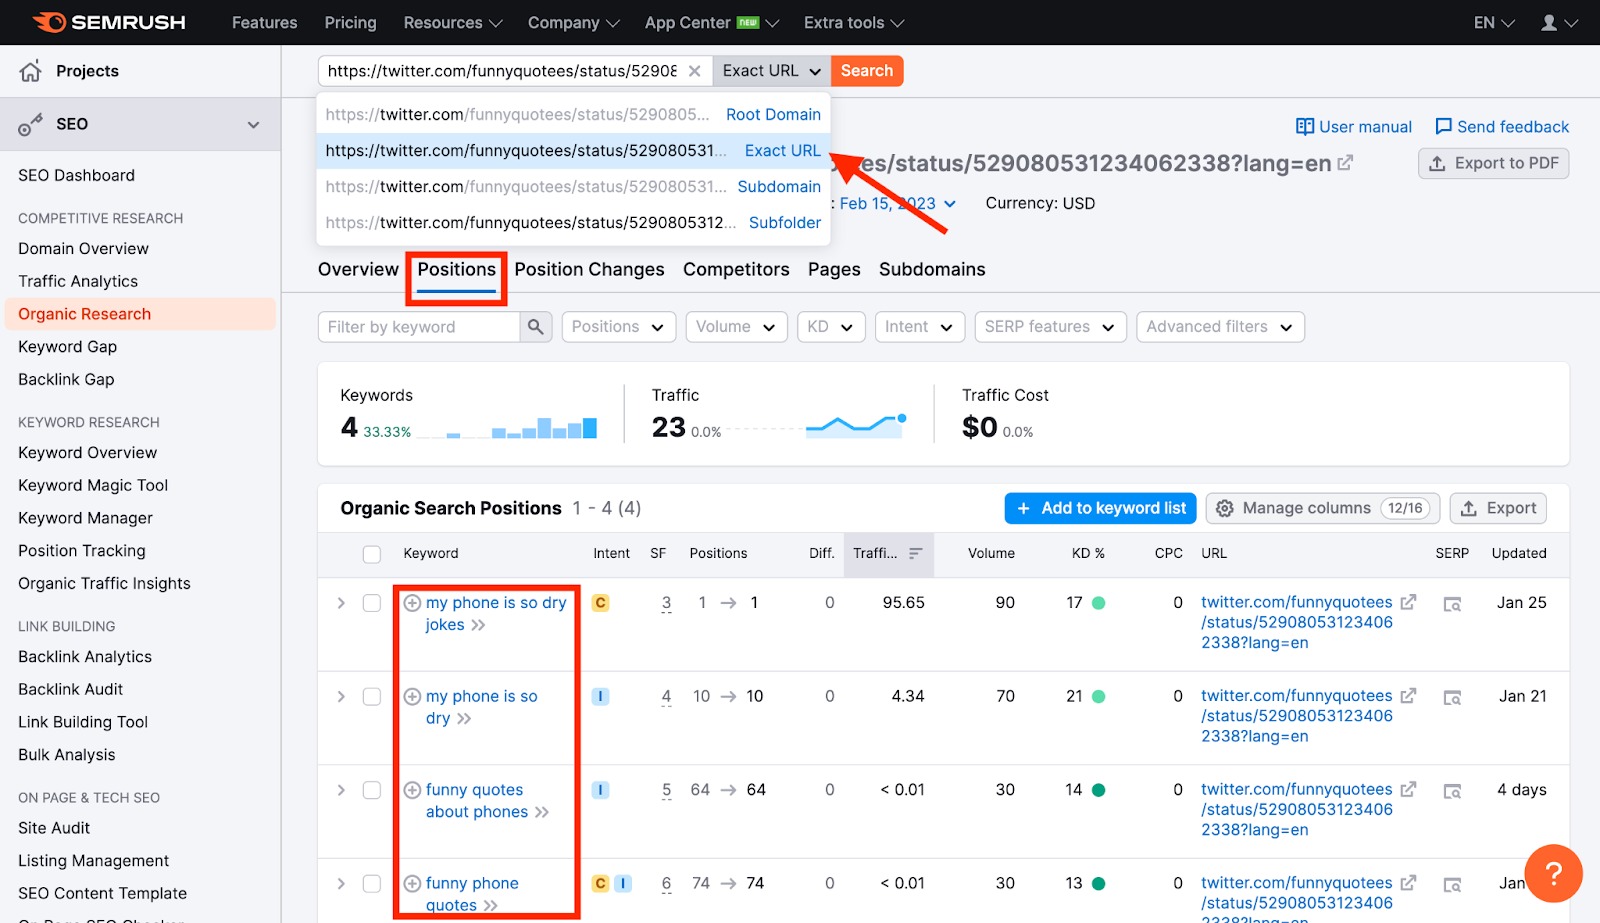 How Semrush Collects Data About Twitter Carousels 